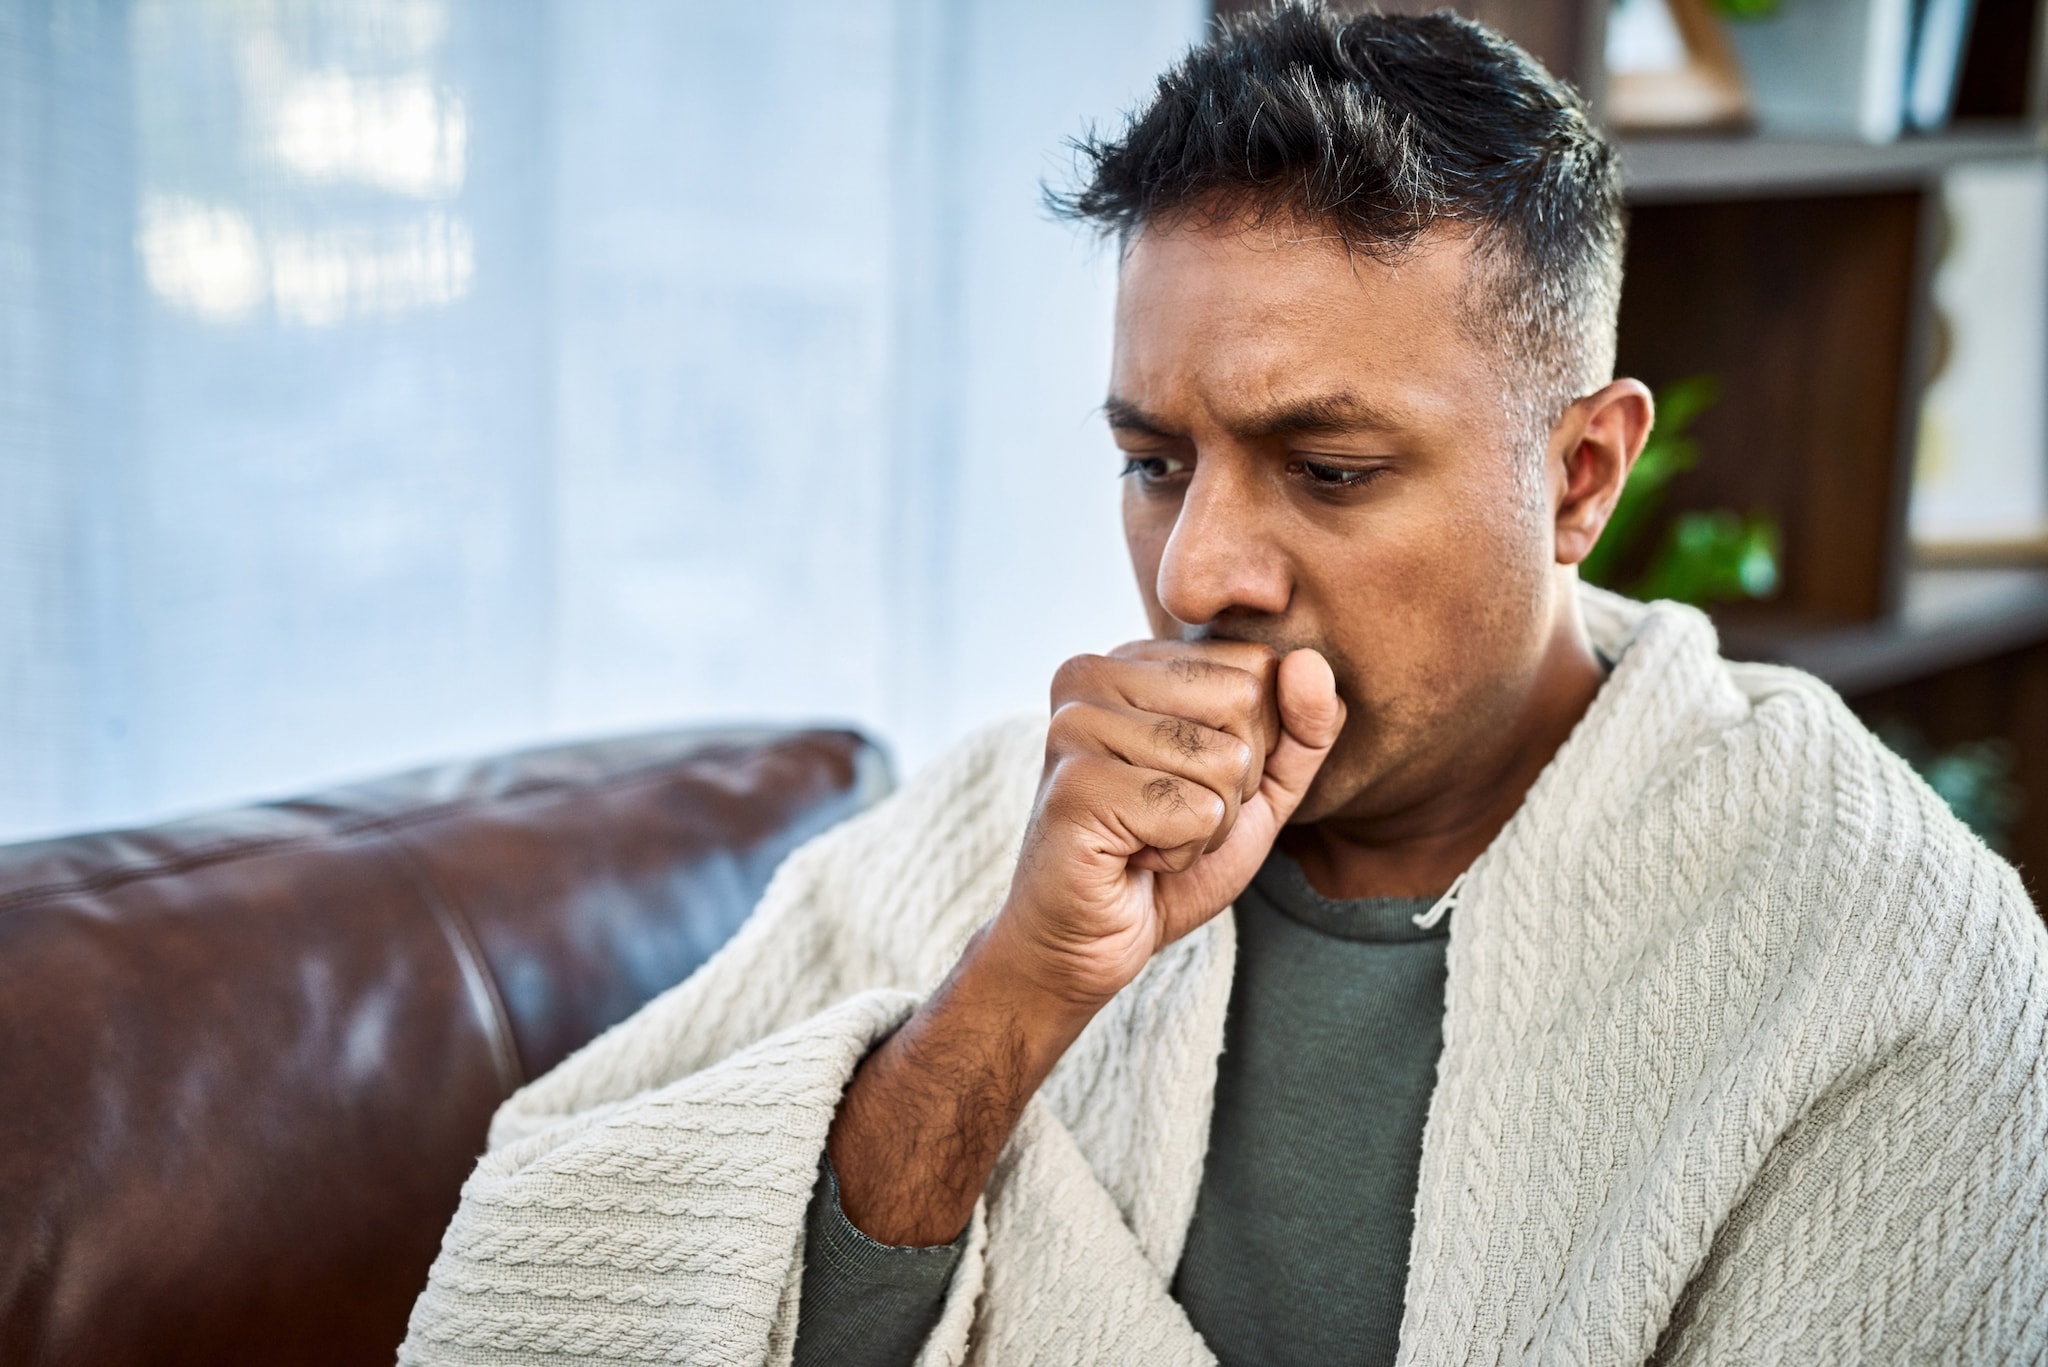 A man sitting on a sofa and coughing.